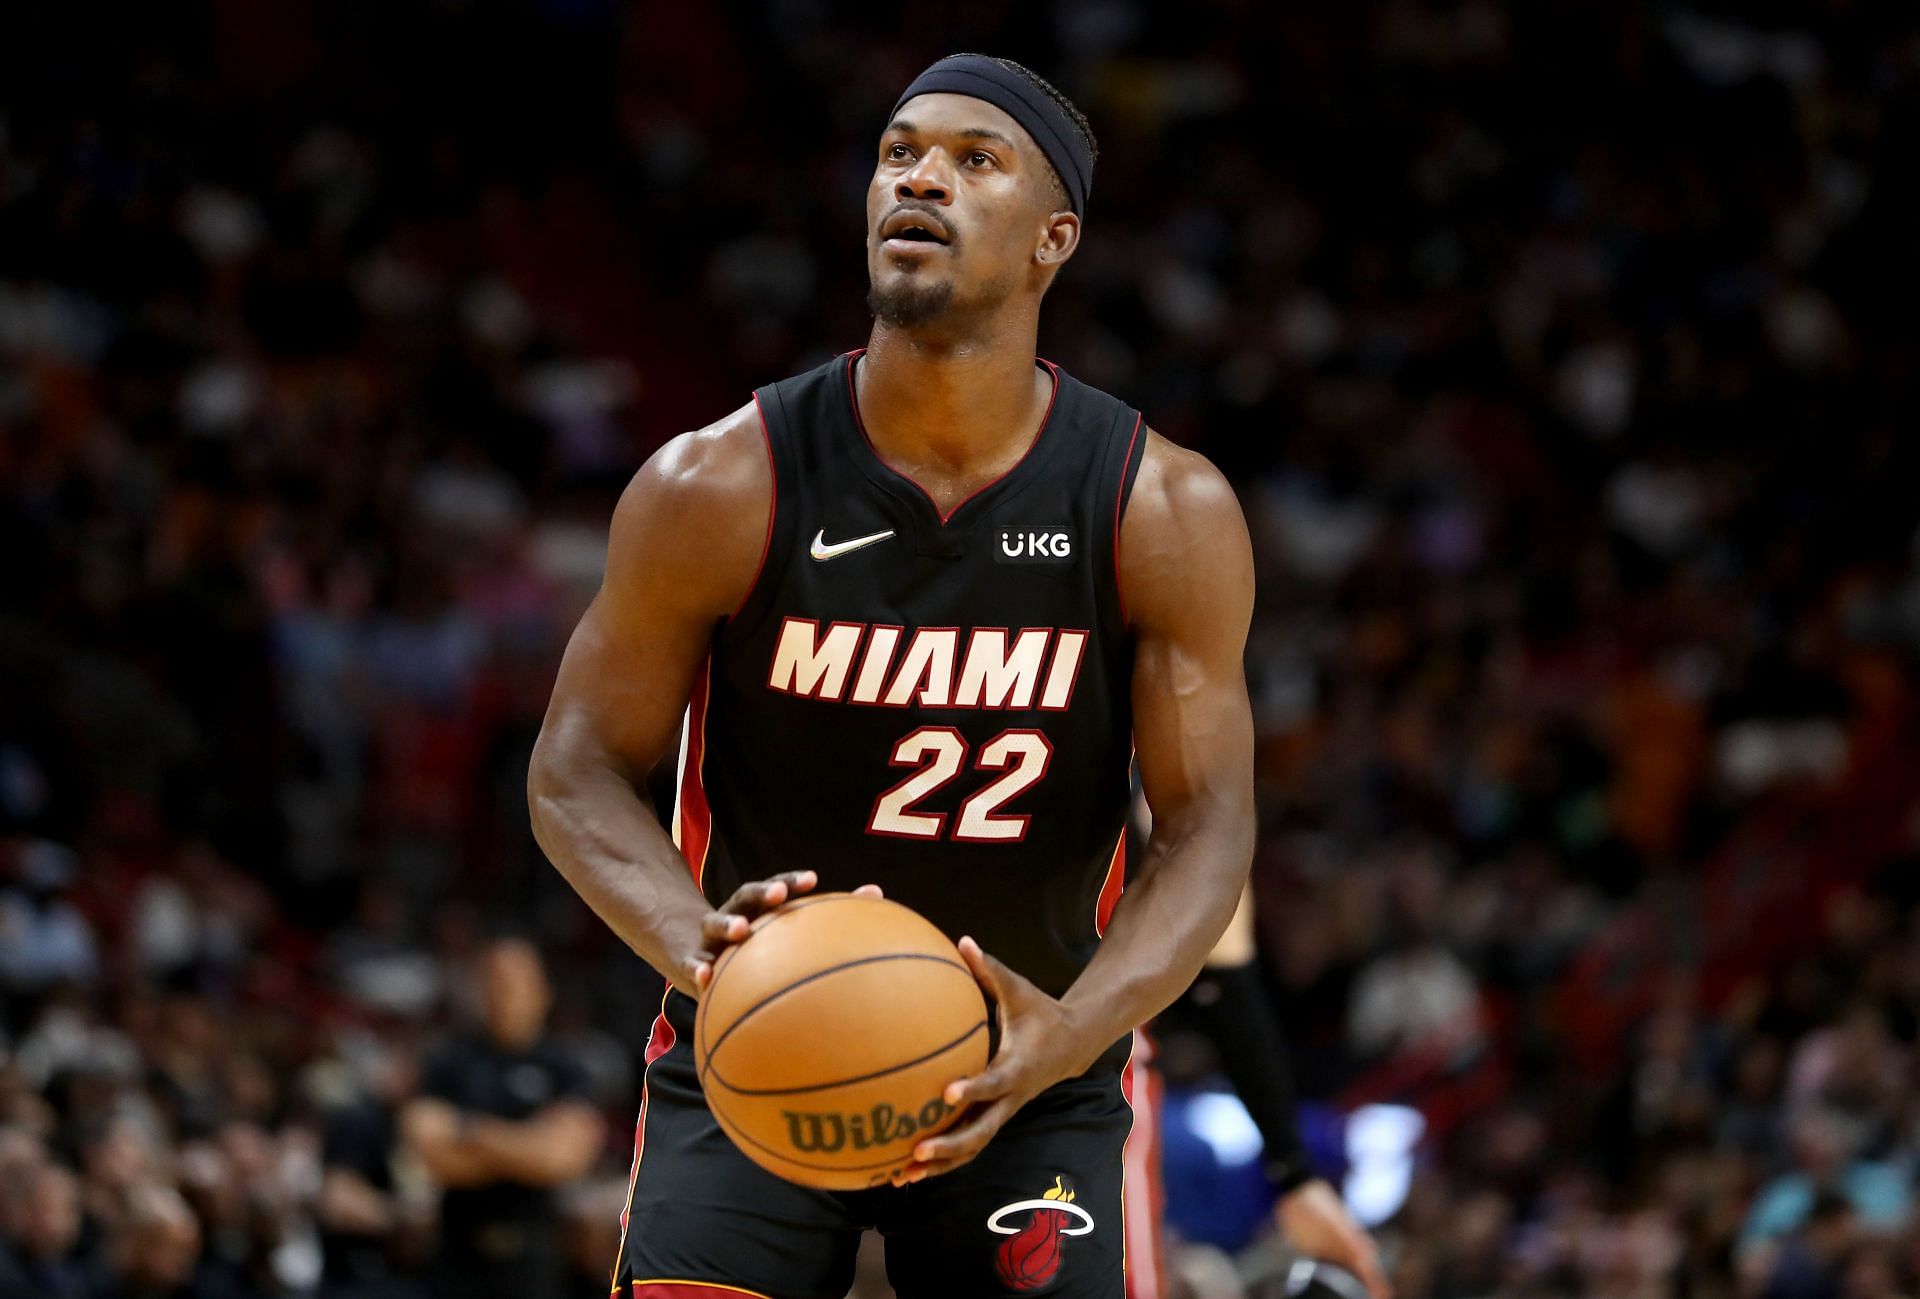 Jimmy Butler of the Miami Heat shoots a free throw against the San Antonio Spurs